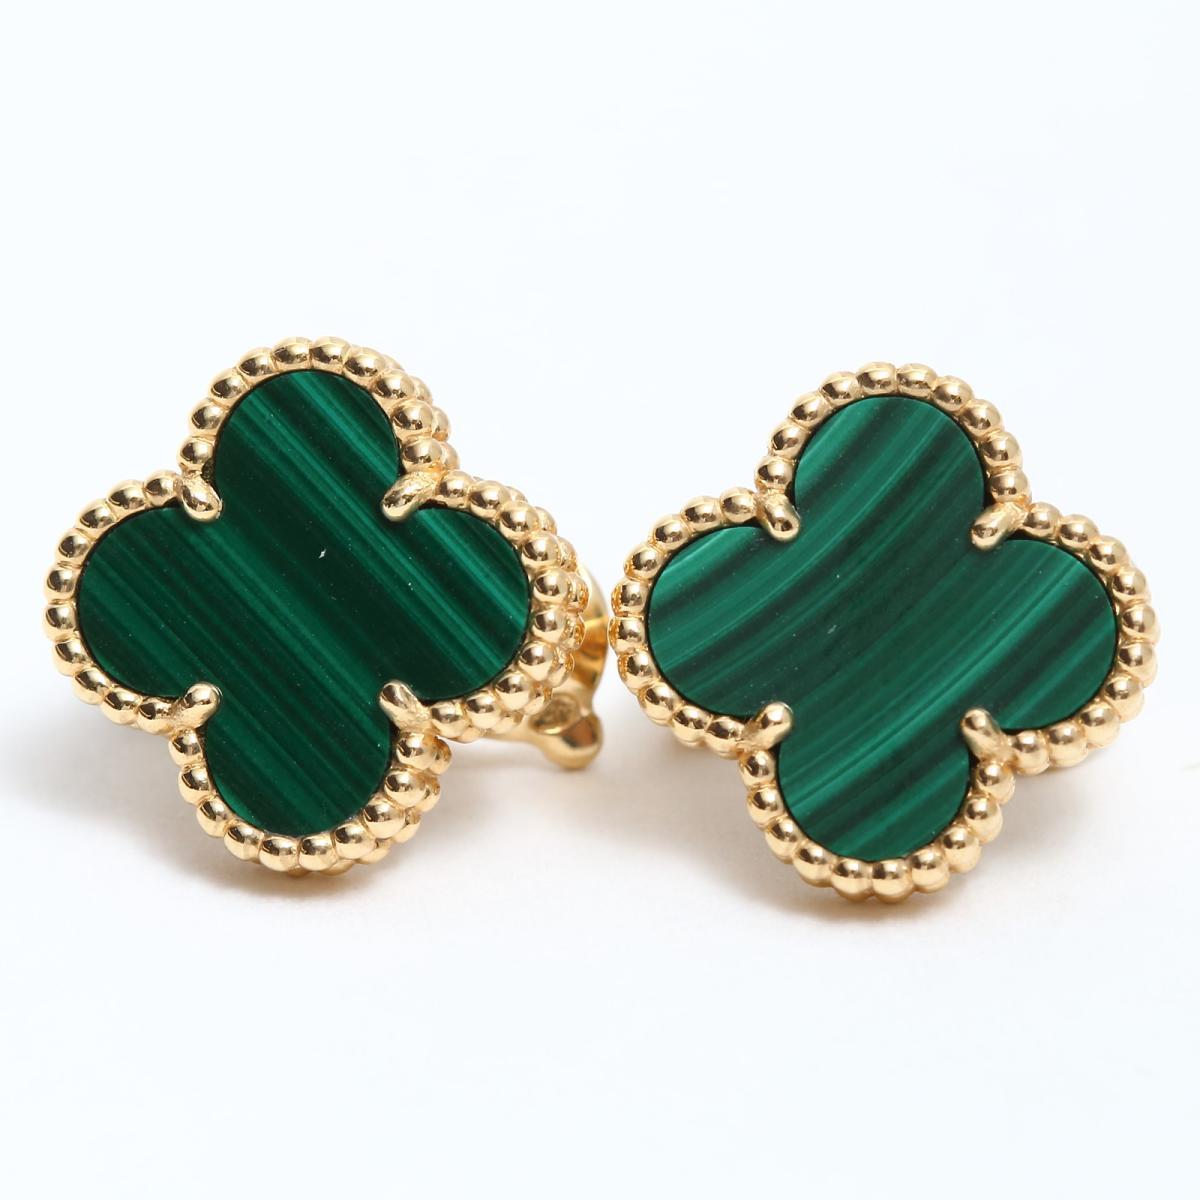 This classic vintage Van Cleef & Arpels earrings are  crafted in 18k yellow gold and feature 2lucky clover motifs inlaid withmalachite in round bead settings. Made in France circa 2000 Measurements: 0.59